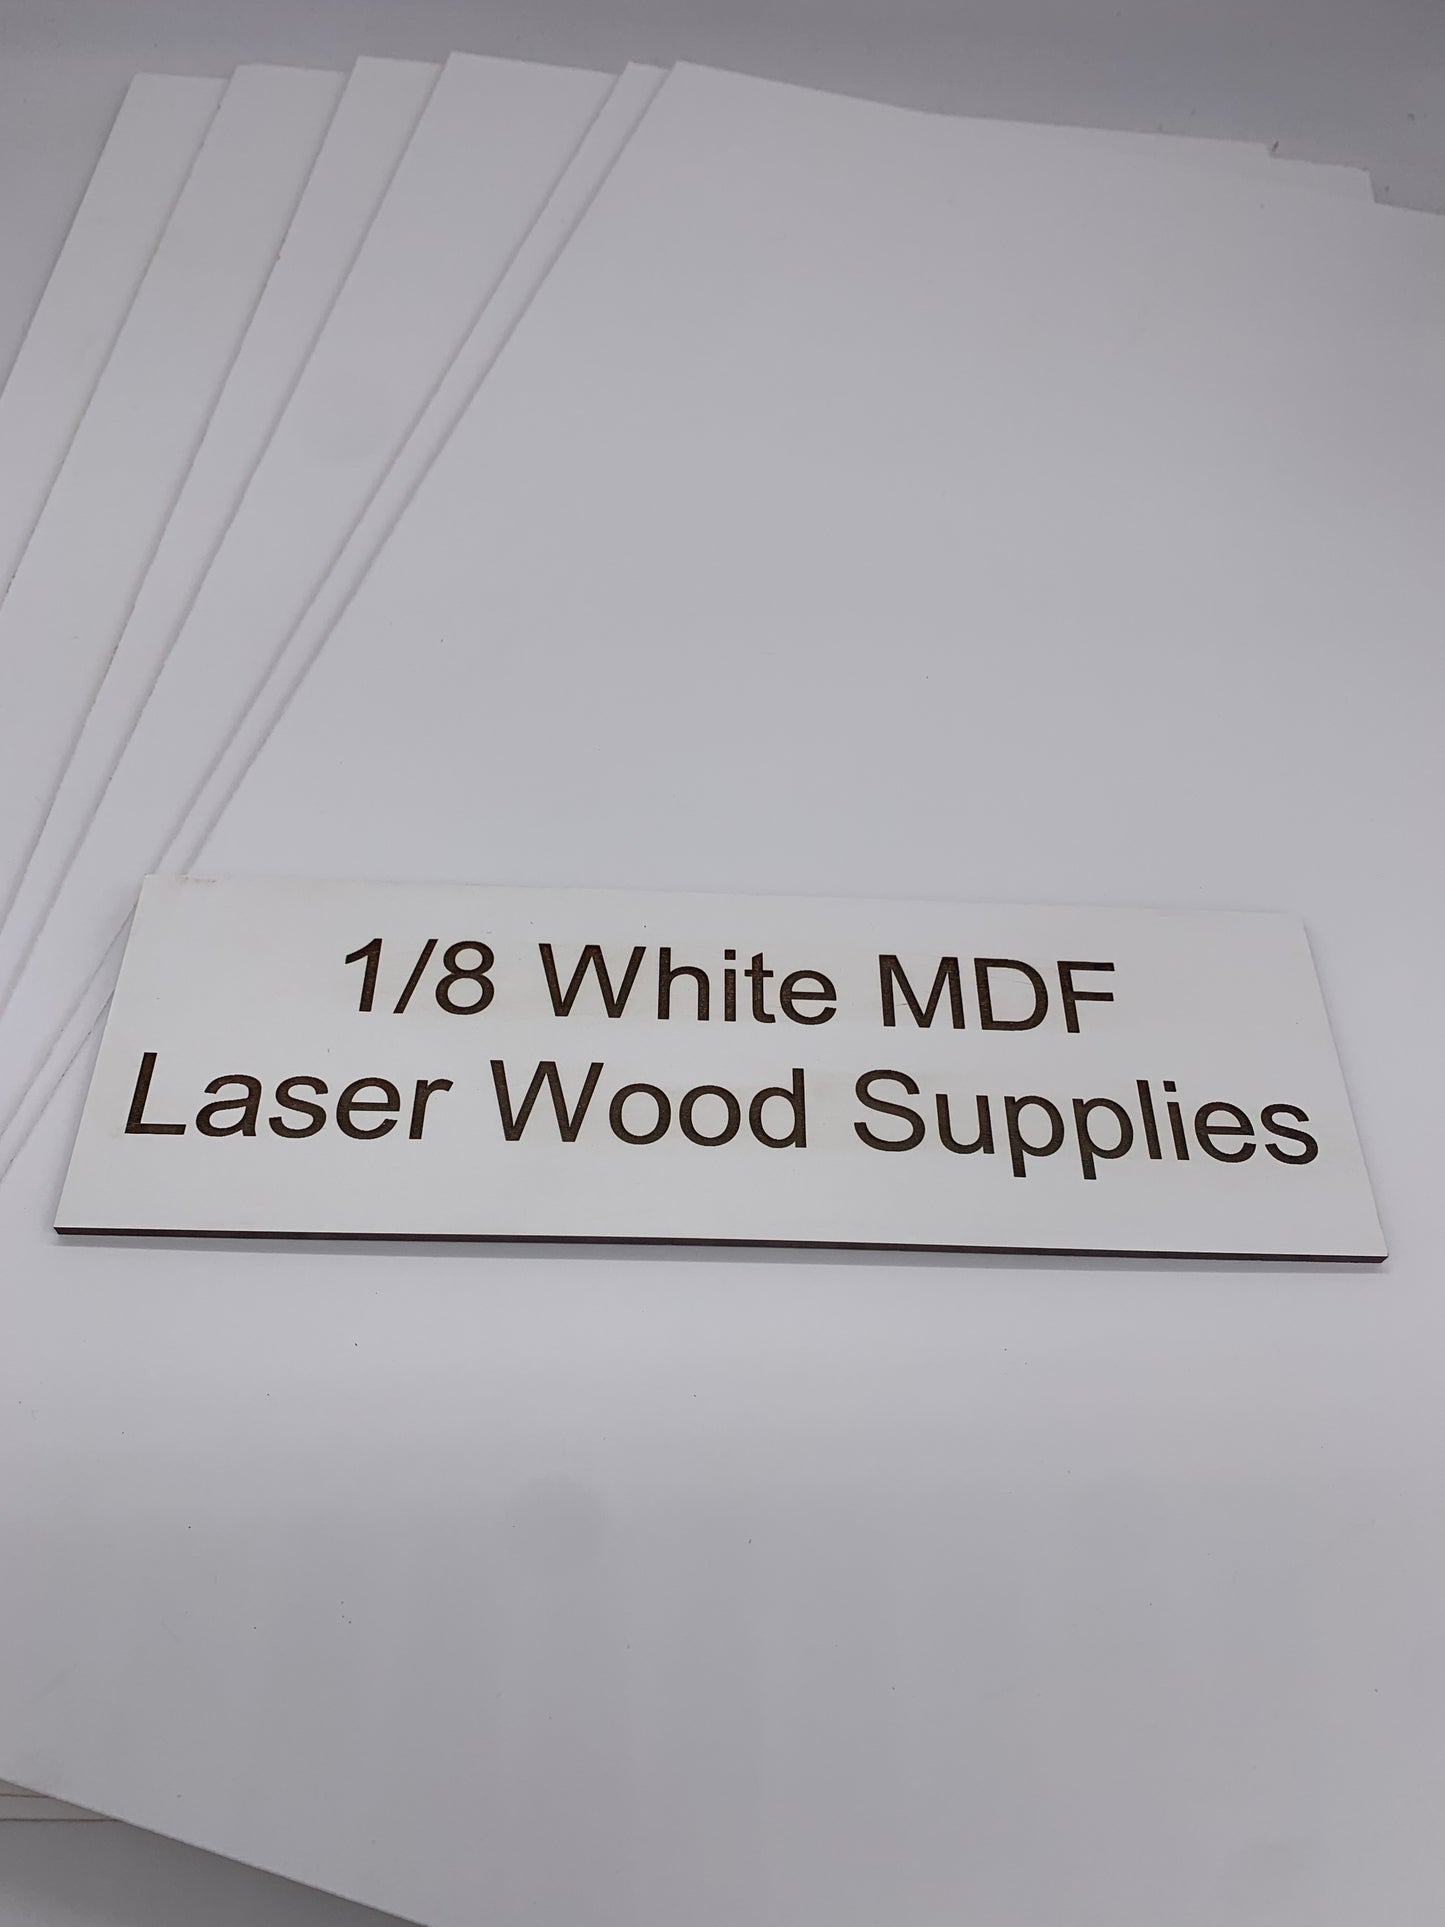 Double sided White MDF, 1/8 MDF painted White on both sides / Perfect for Glowforge or other CO2 Lasers